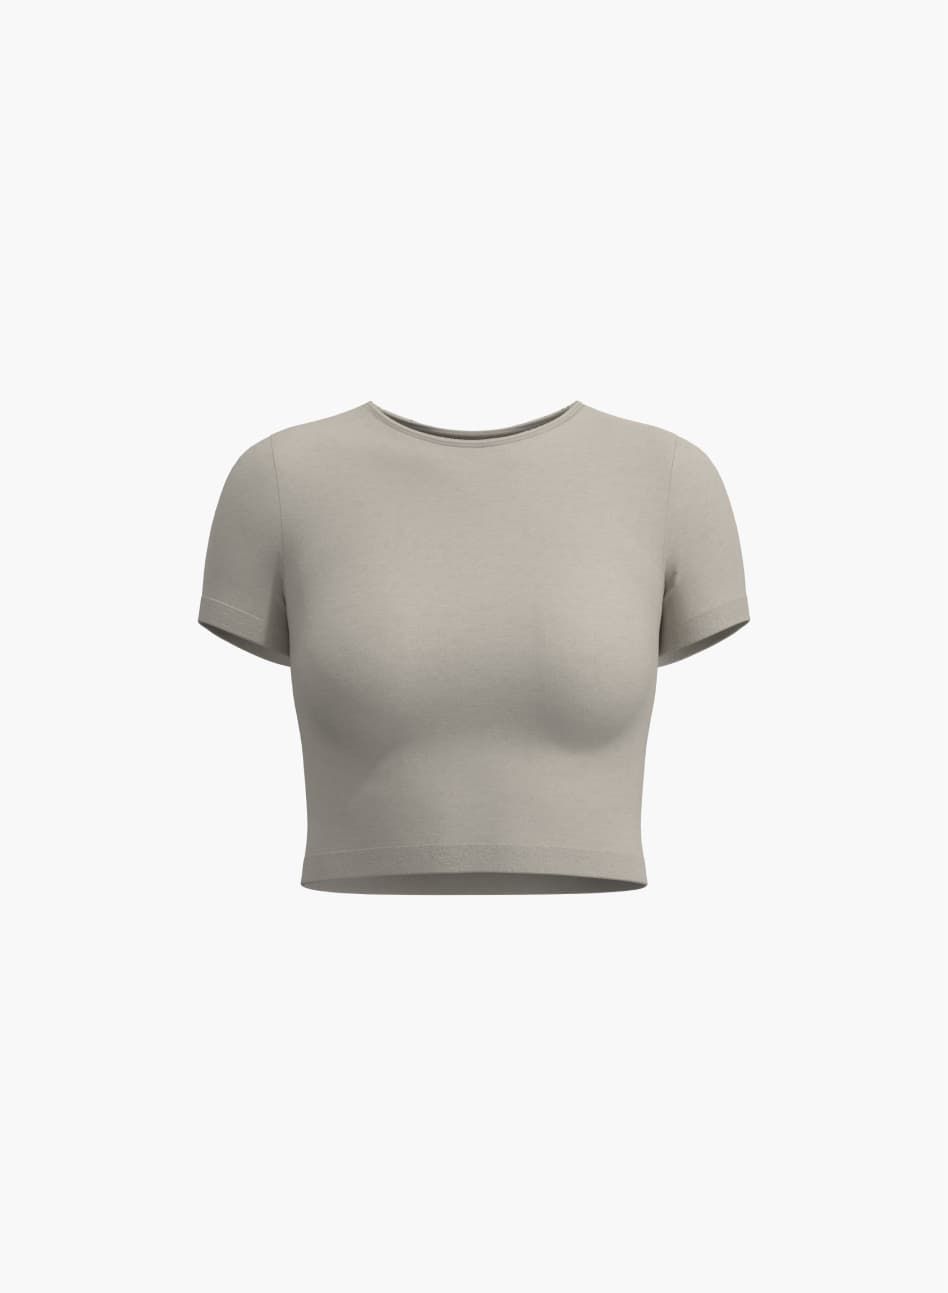 A beige cropped t-shirt.